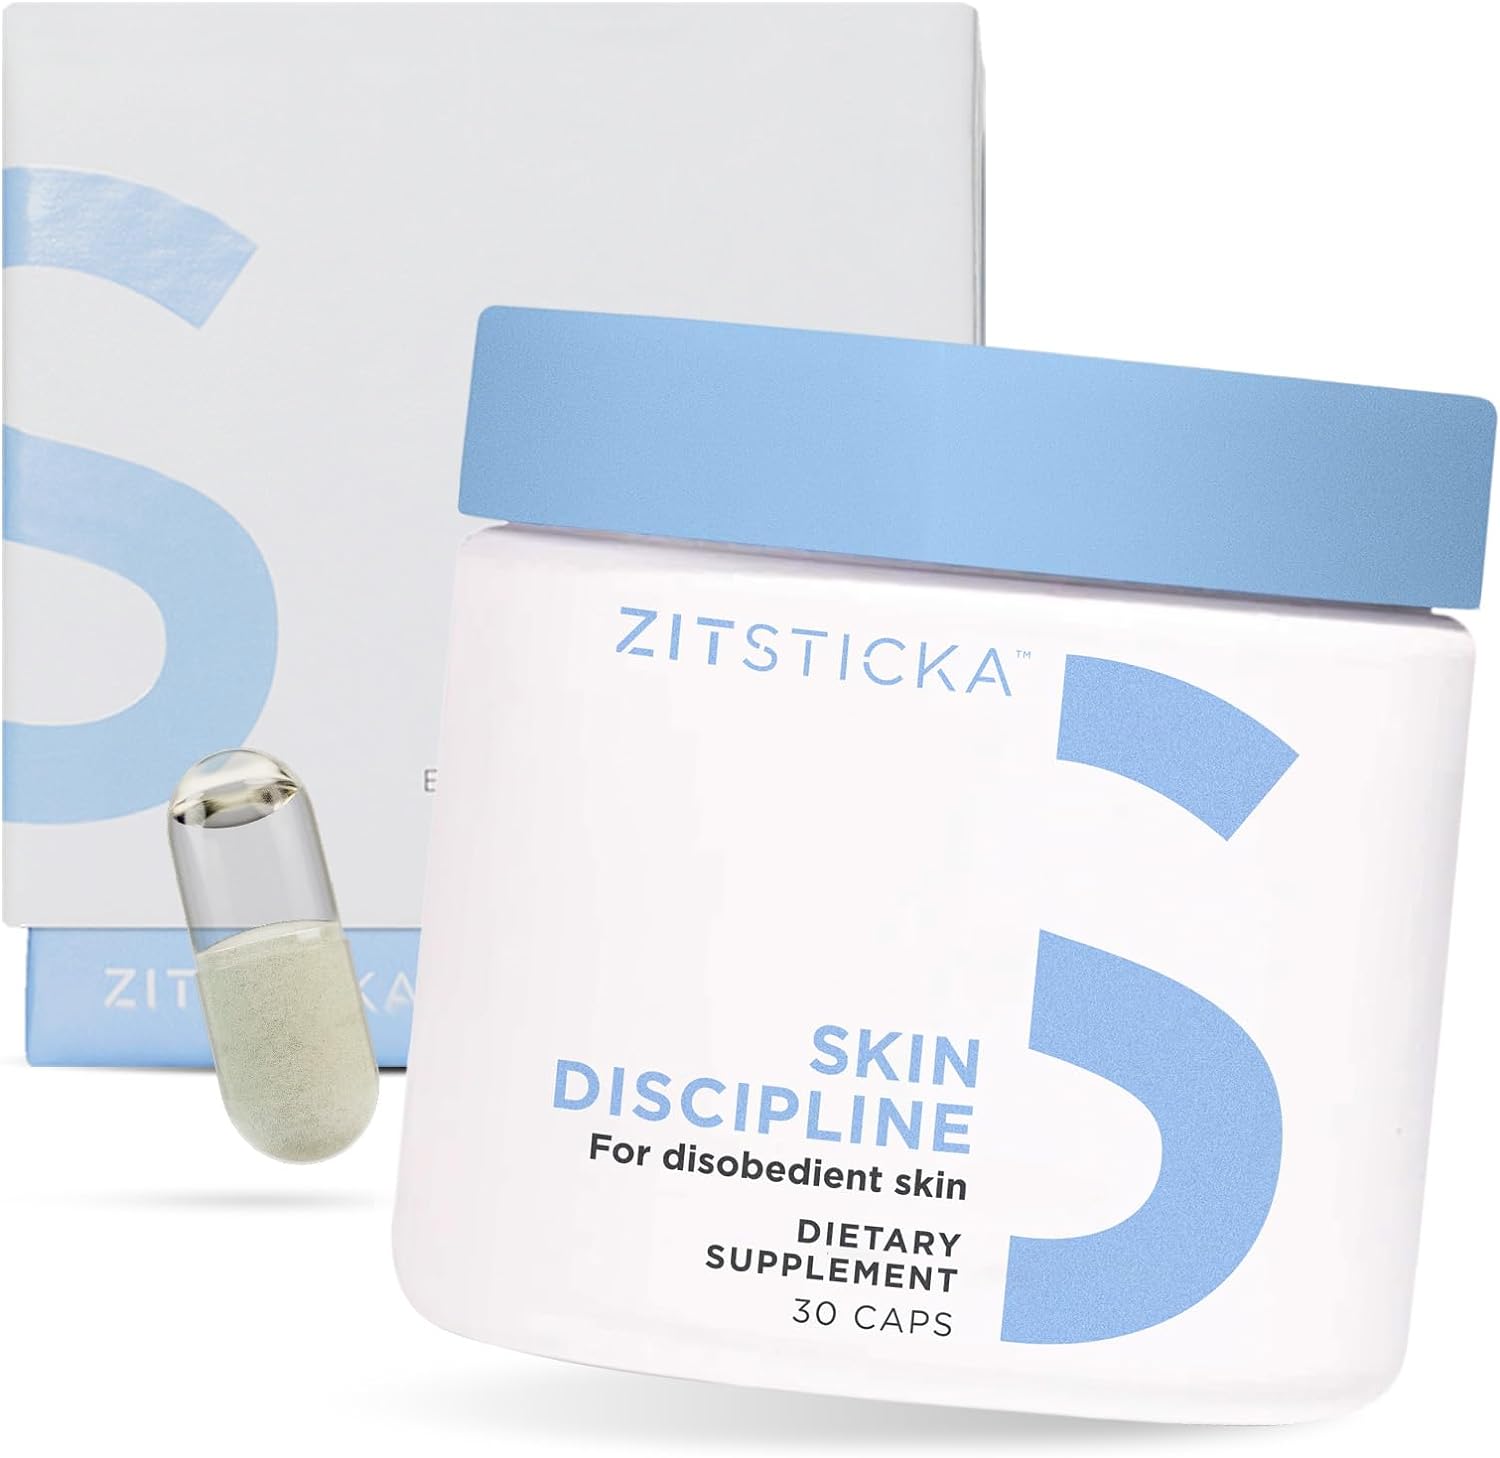 ZitSticka Cystic Acne for Women & Men w/ 30 Natural Caps w/ Multivitamin Oil & Probiotic Powder - Skin Discipline All-In-One Supplements for Hormonal Acne, Skin Clarity & Tone - Dermatologist Tested